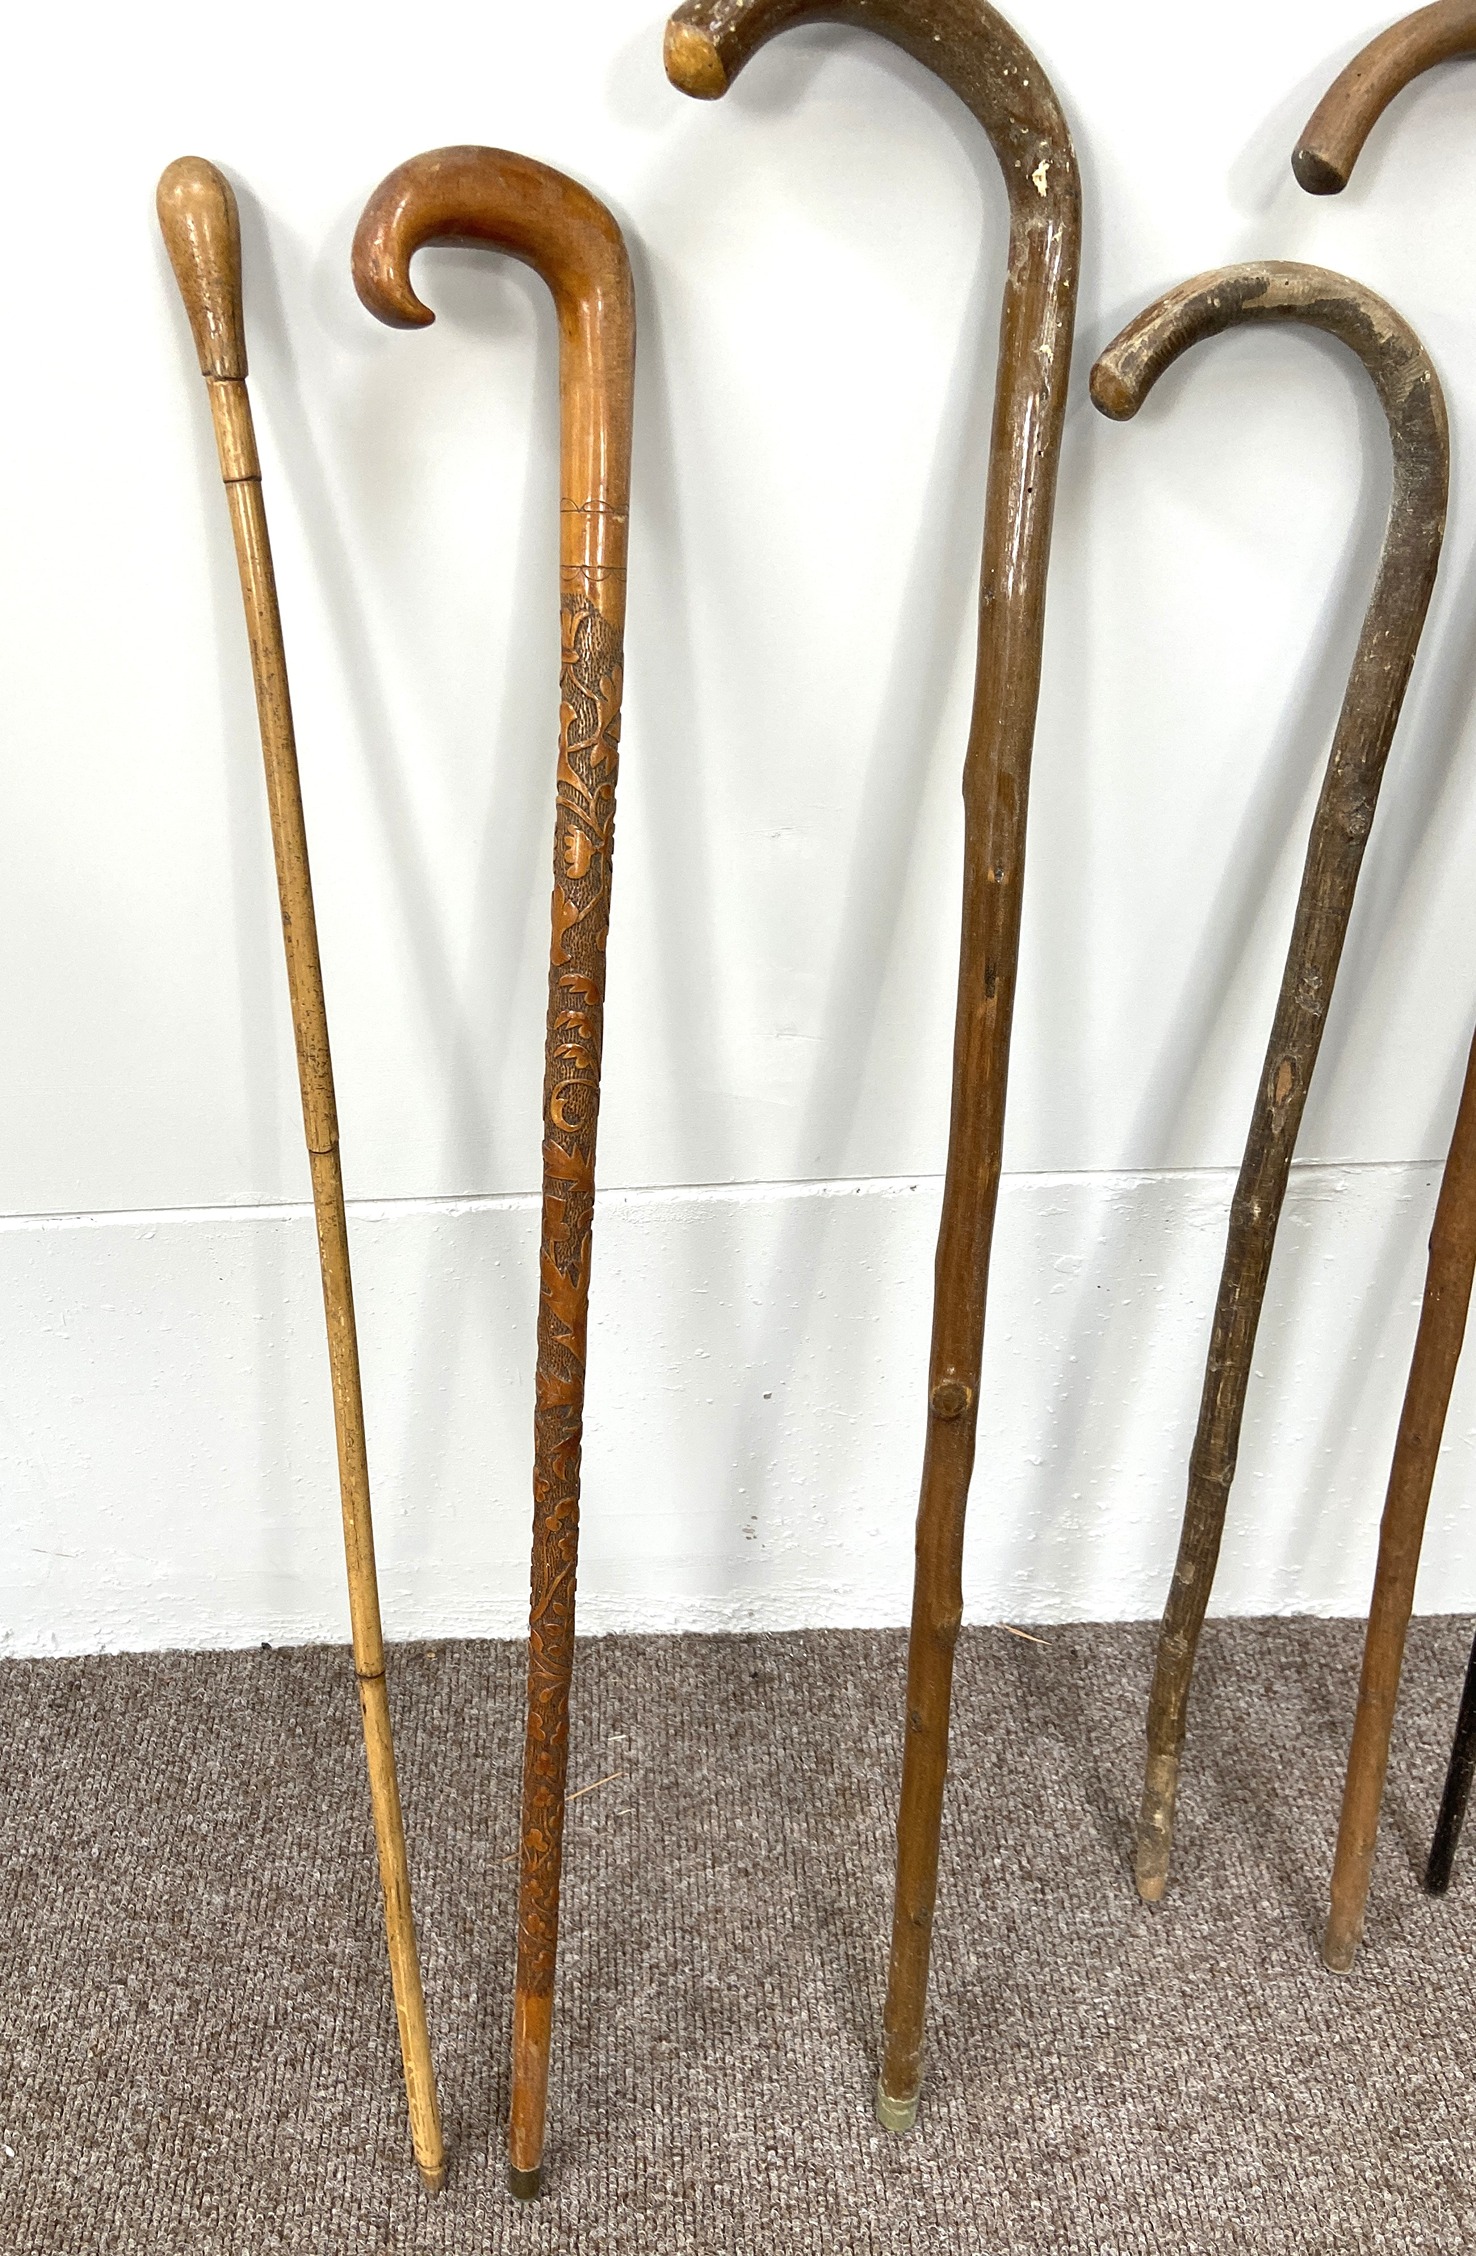 Six assorted walking sticks and canes, including an example with finely carved cane and hooked - Image 2 of 6